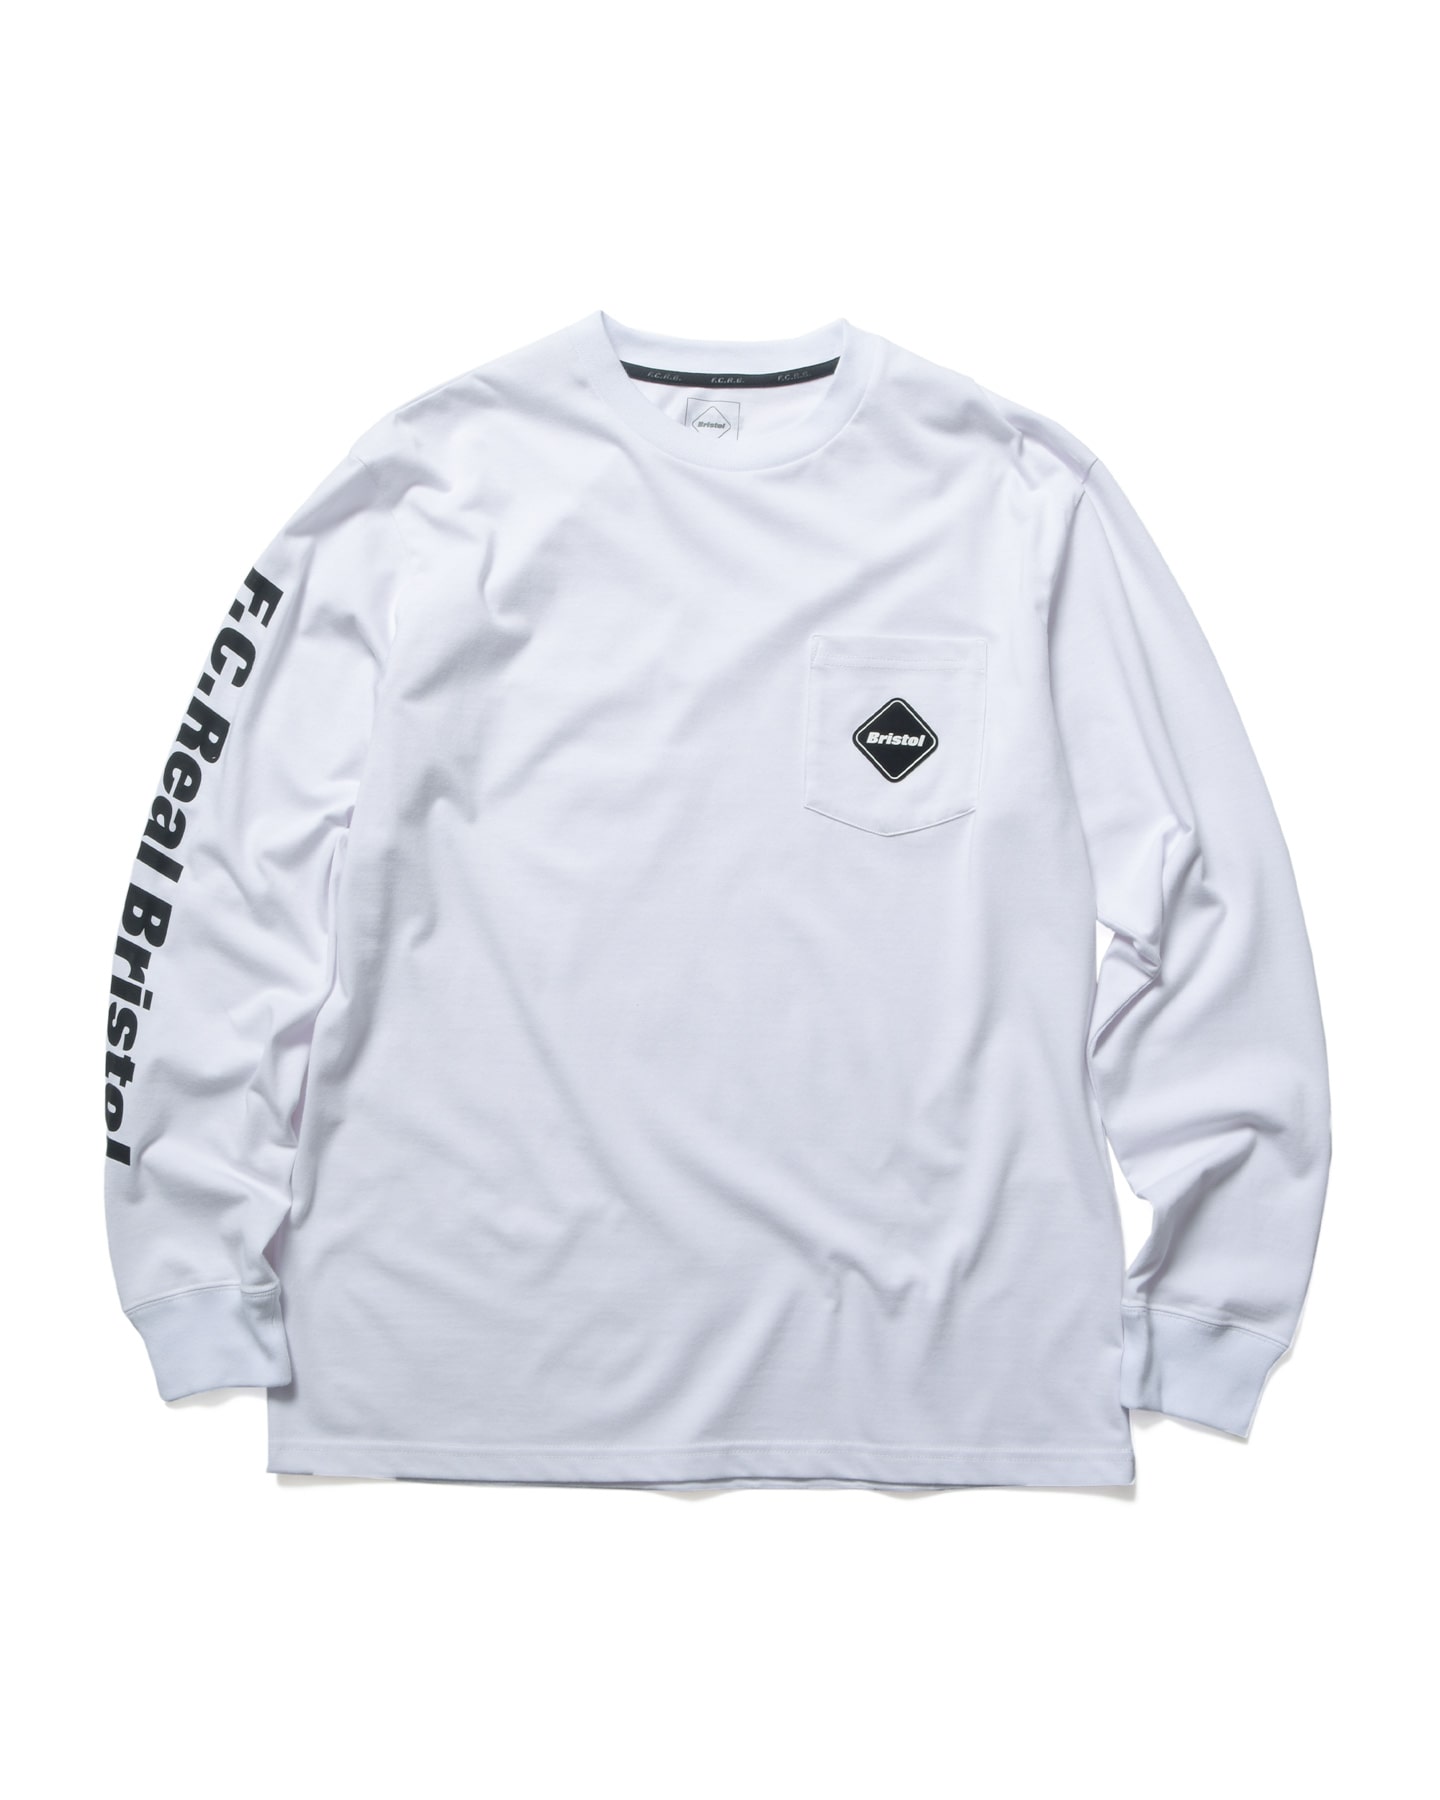 FCRB AUTHENTIC L/S TEAM POCKET TEE WHITE - Tシャツ/カットソー(七分